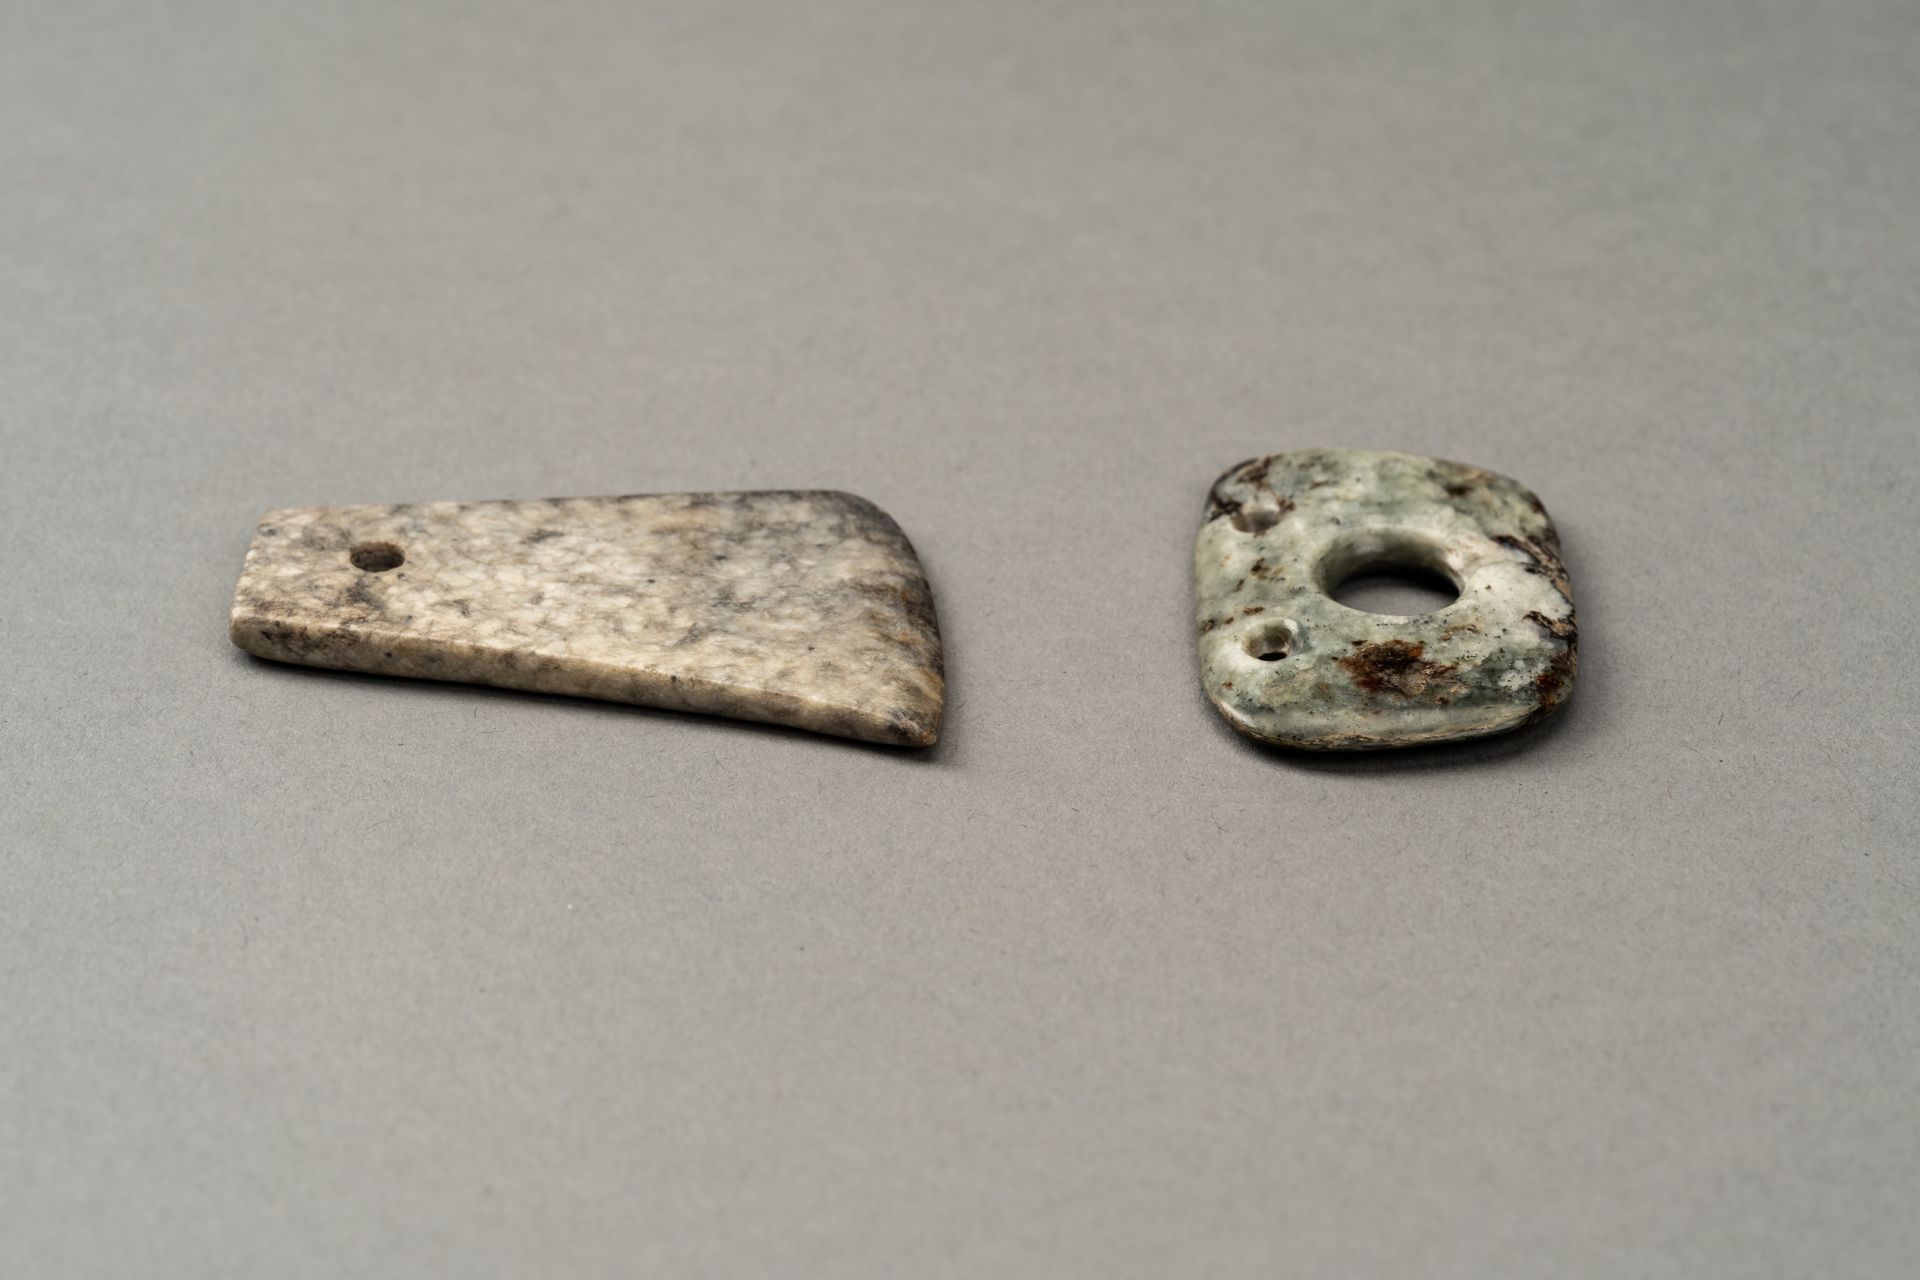 A FINE GROUP OF SIX NEOLITHIC JADE ORNAMENTS - Image 8 of 10